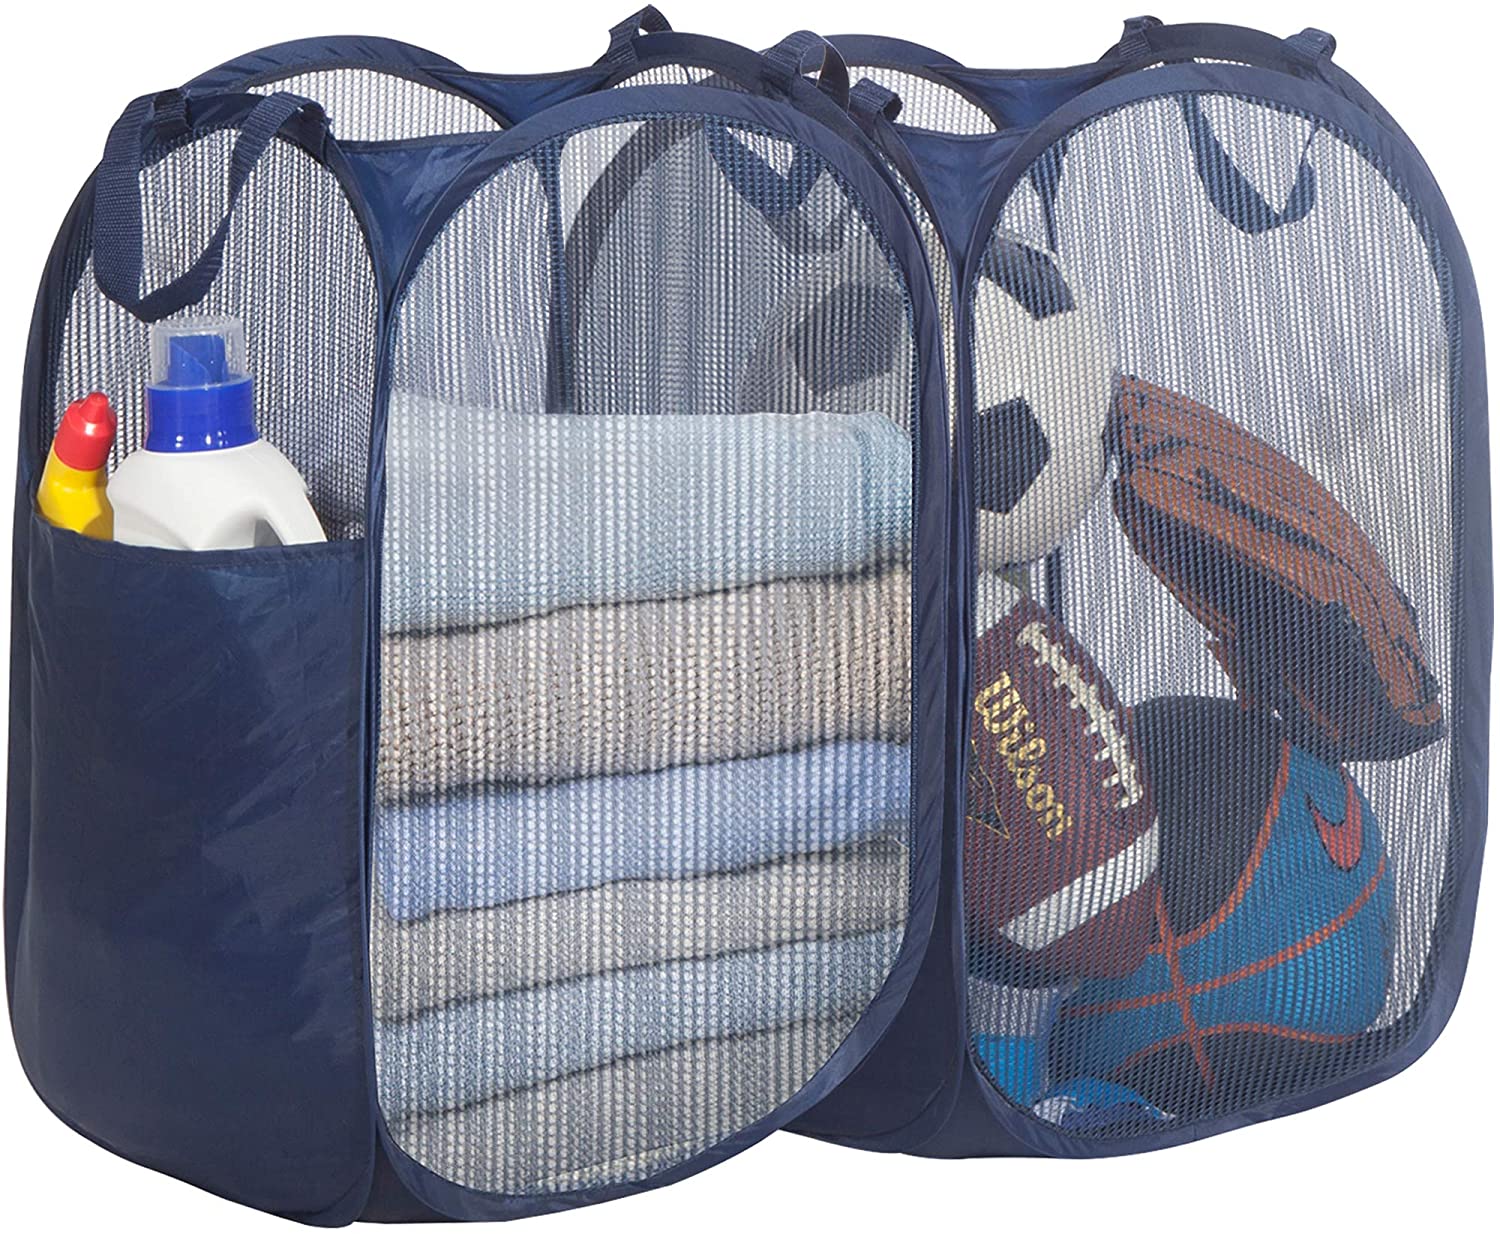 with Side Pocket and Reinforced Handles Collapsible to Storage and Easy to Open Storage Basket TropSetil 2-Packs Strong Mesh Pop-up Laundry Hamper 